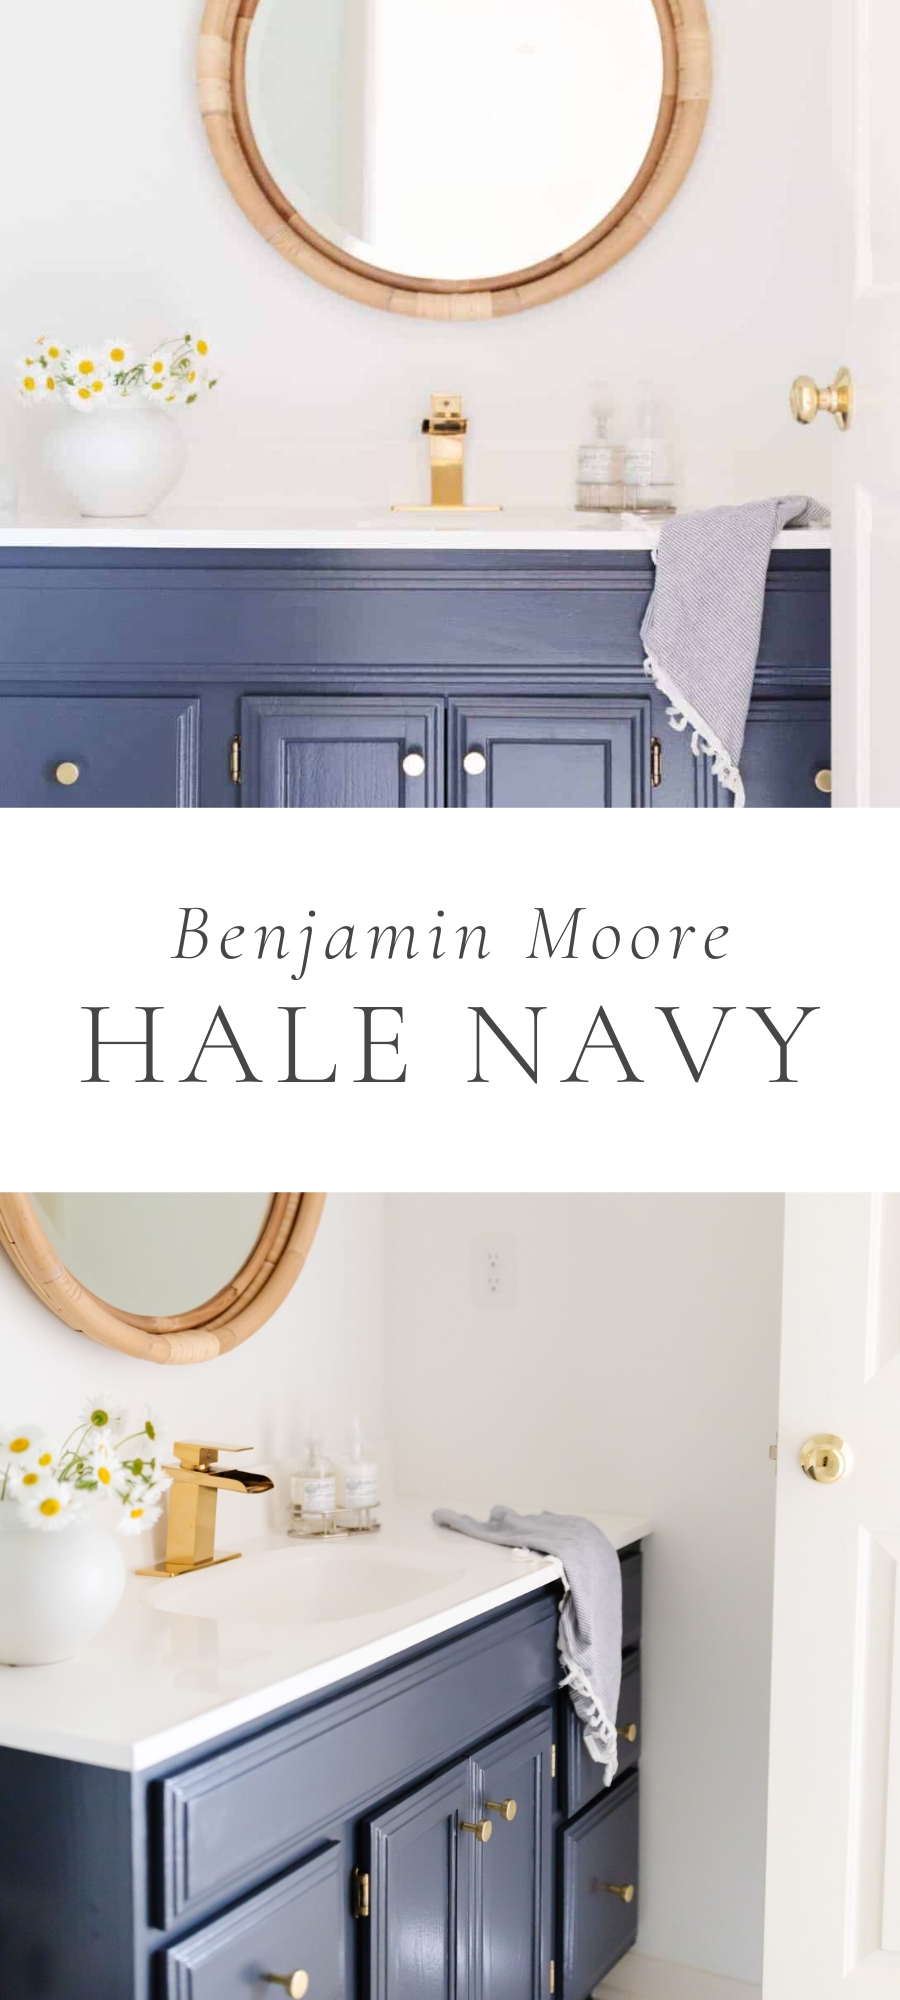 white bathroom images with round mirror and blue vanity with brass hardware and caption "Benjamin Moore Hale Navy"